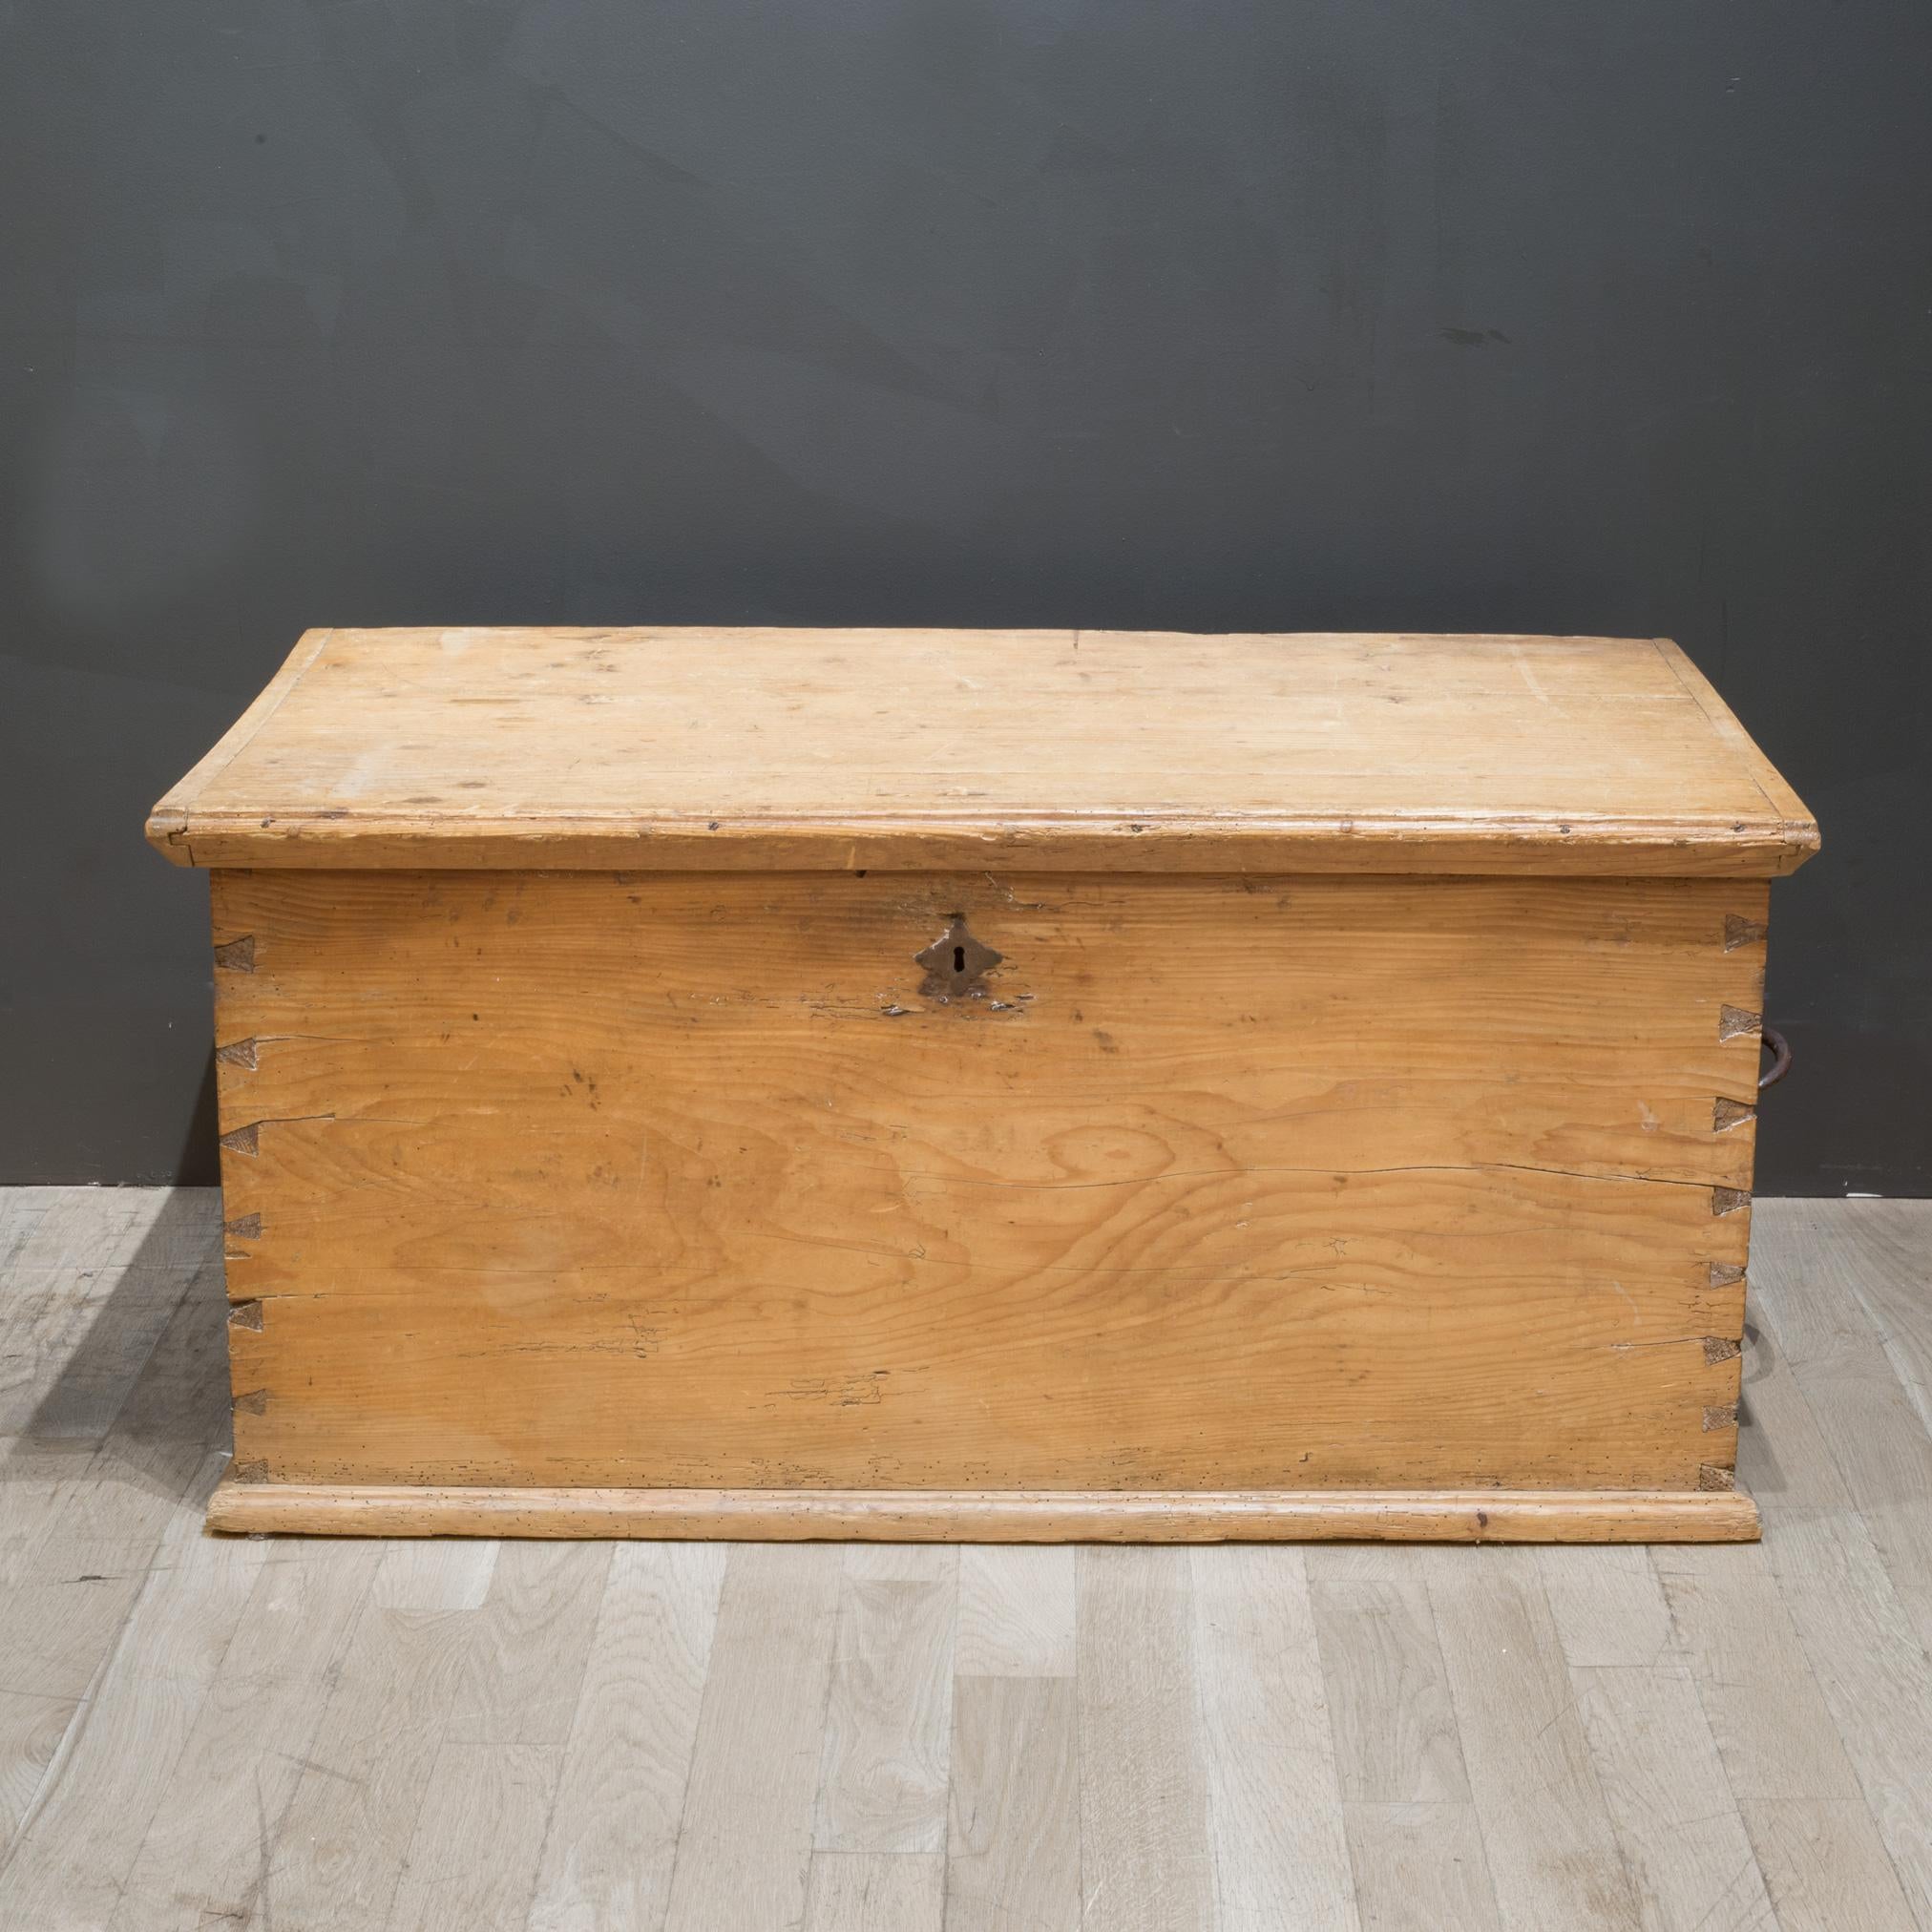 About

An original late 19th century to early 20th century Pine blanket chest with dovetail joints, steel handles on the sides and large steel hinges.

 Creator Unknown.
 Date of manufacture c.1880-1920.
 Materials and techniques Stained Pine,